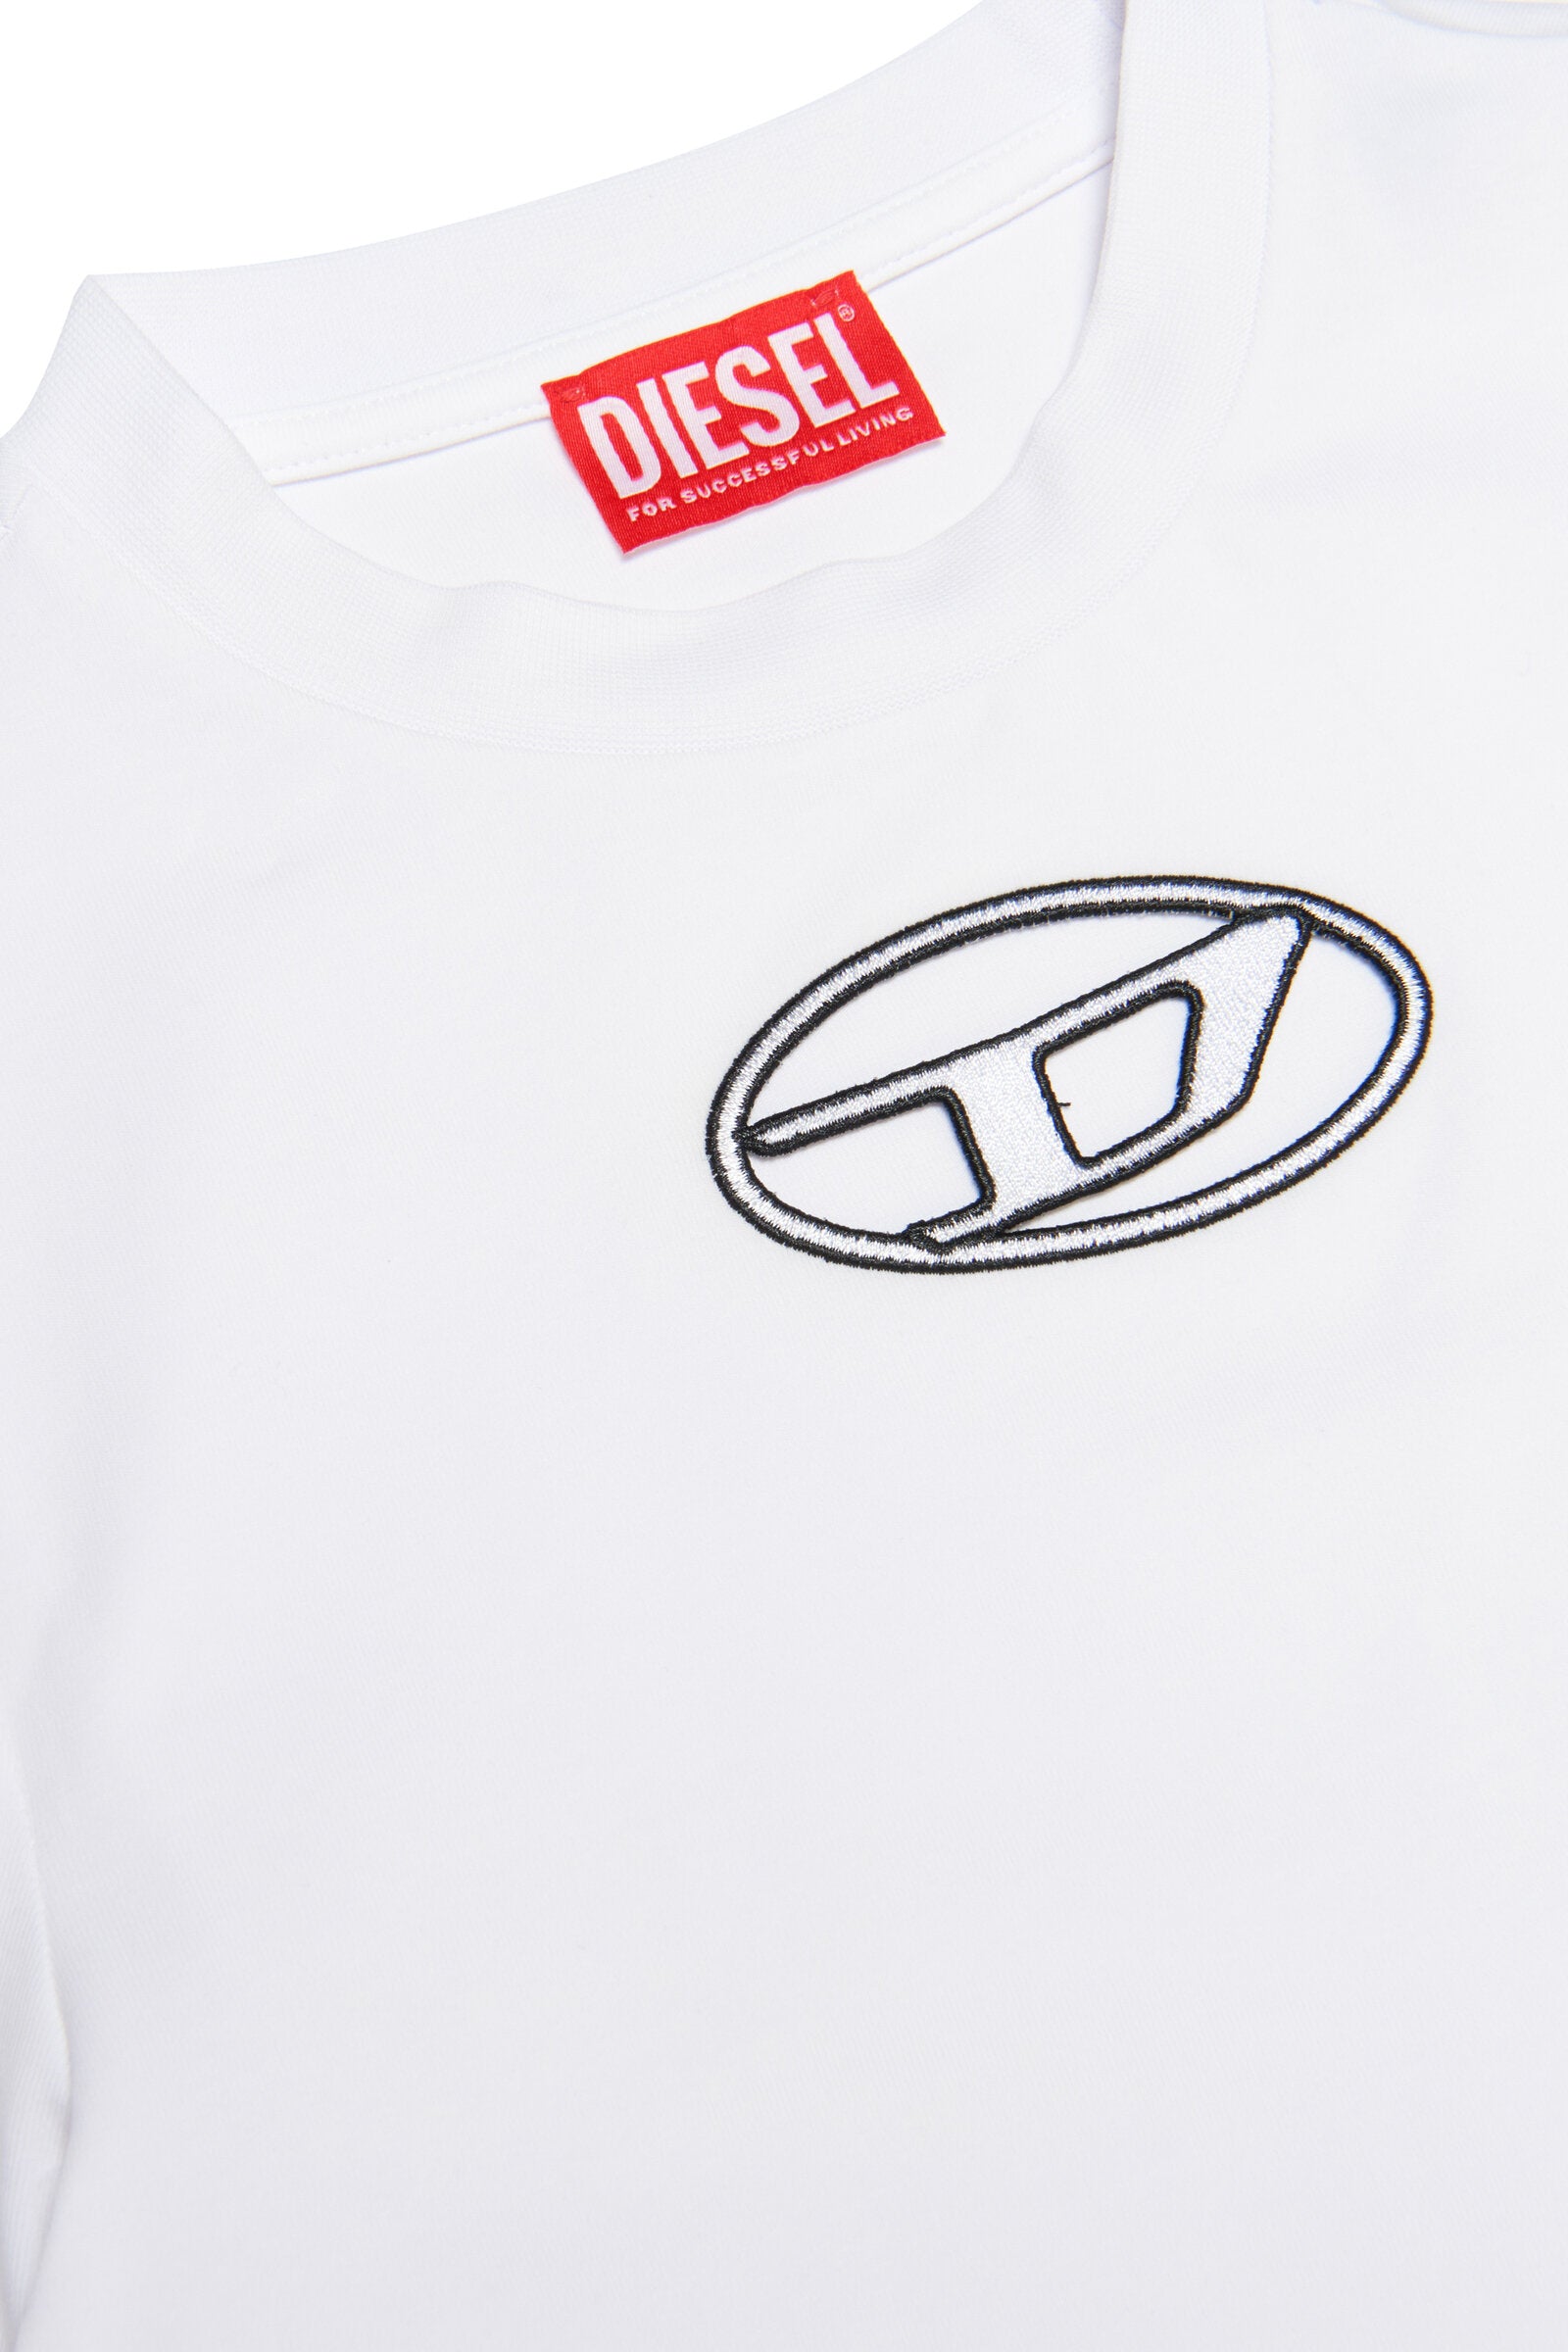 Diesel white cropped jersey t-shirt with oval D logo for children